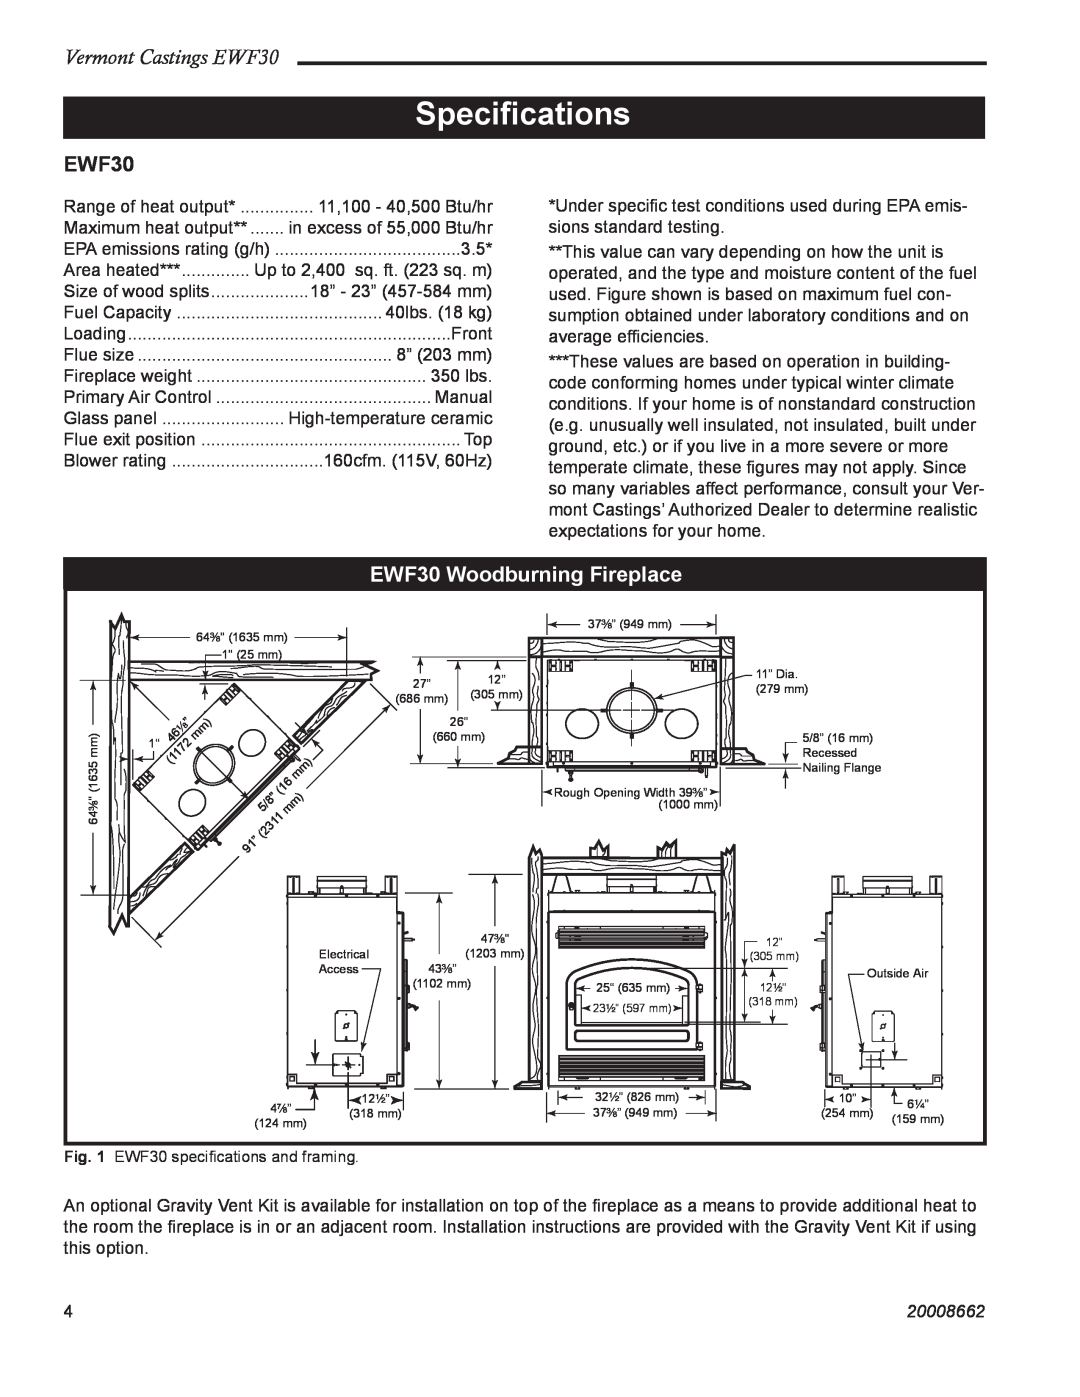 Vermont Casting installation instructions Speciﬁcations, EWF30 Woodburning Fireplace, Vermont Castings EWF30, 20008662 